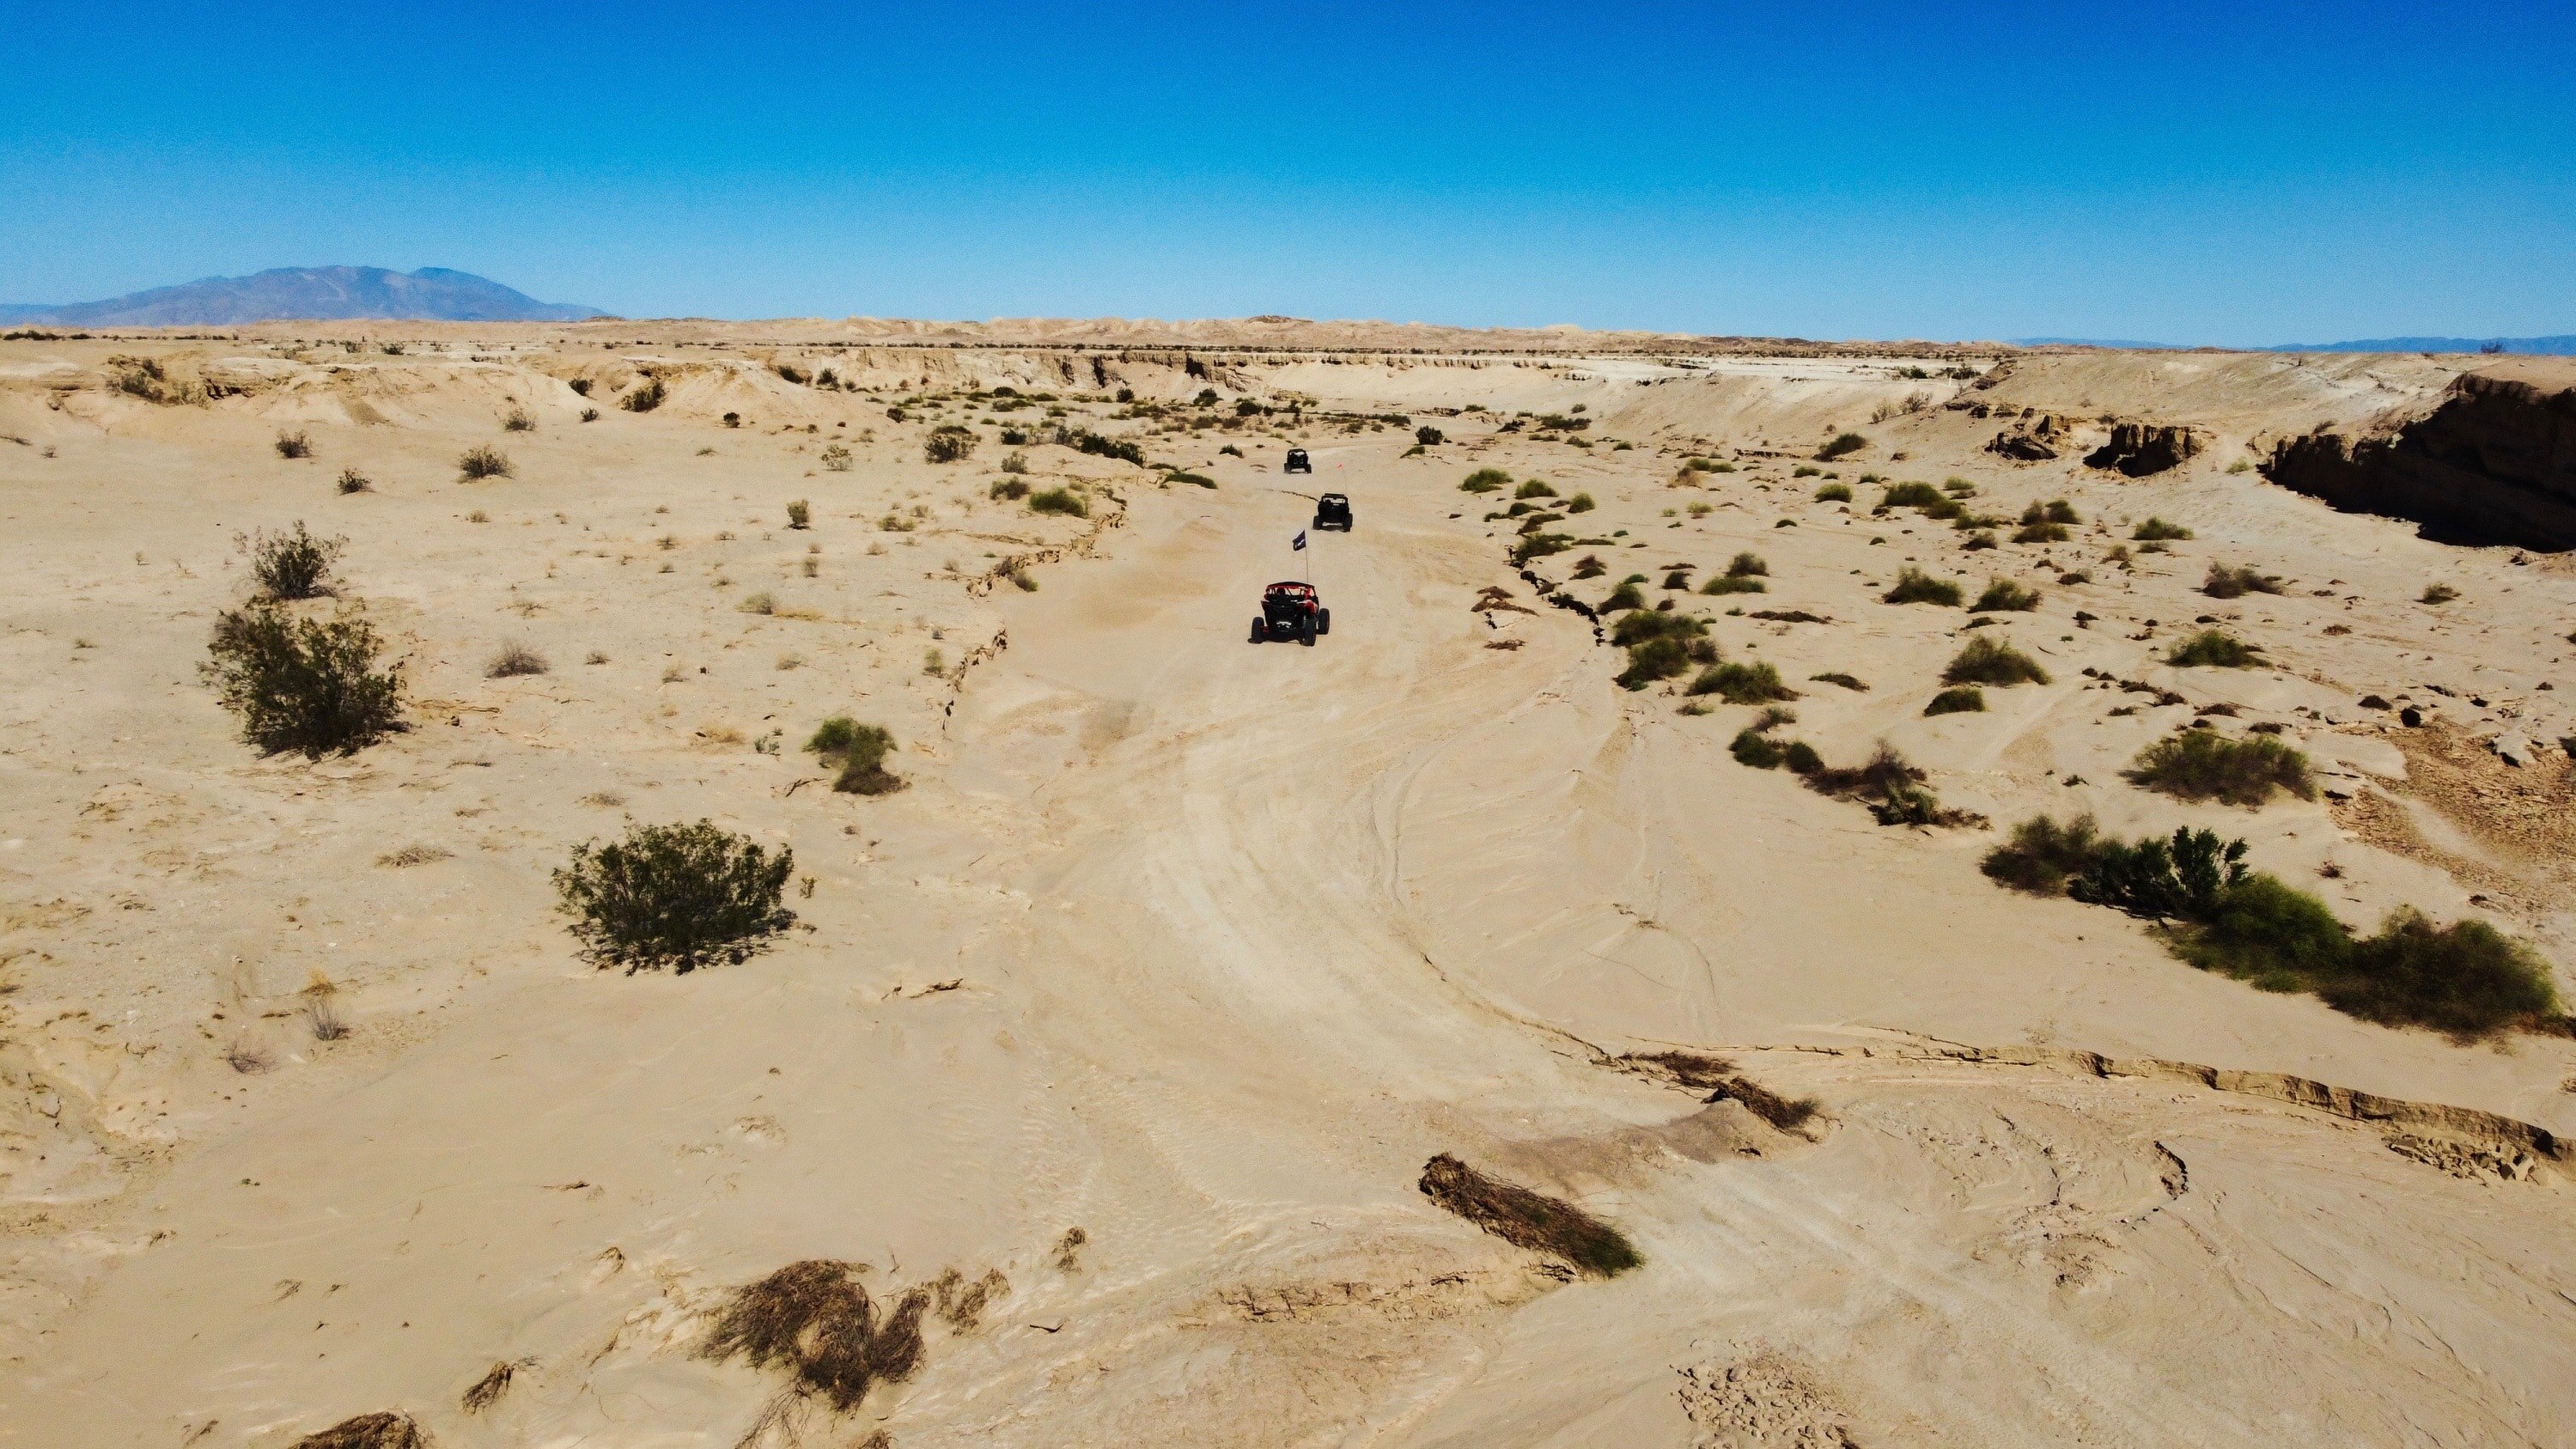 Bird's eye view of in the desert with SSV's